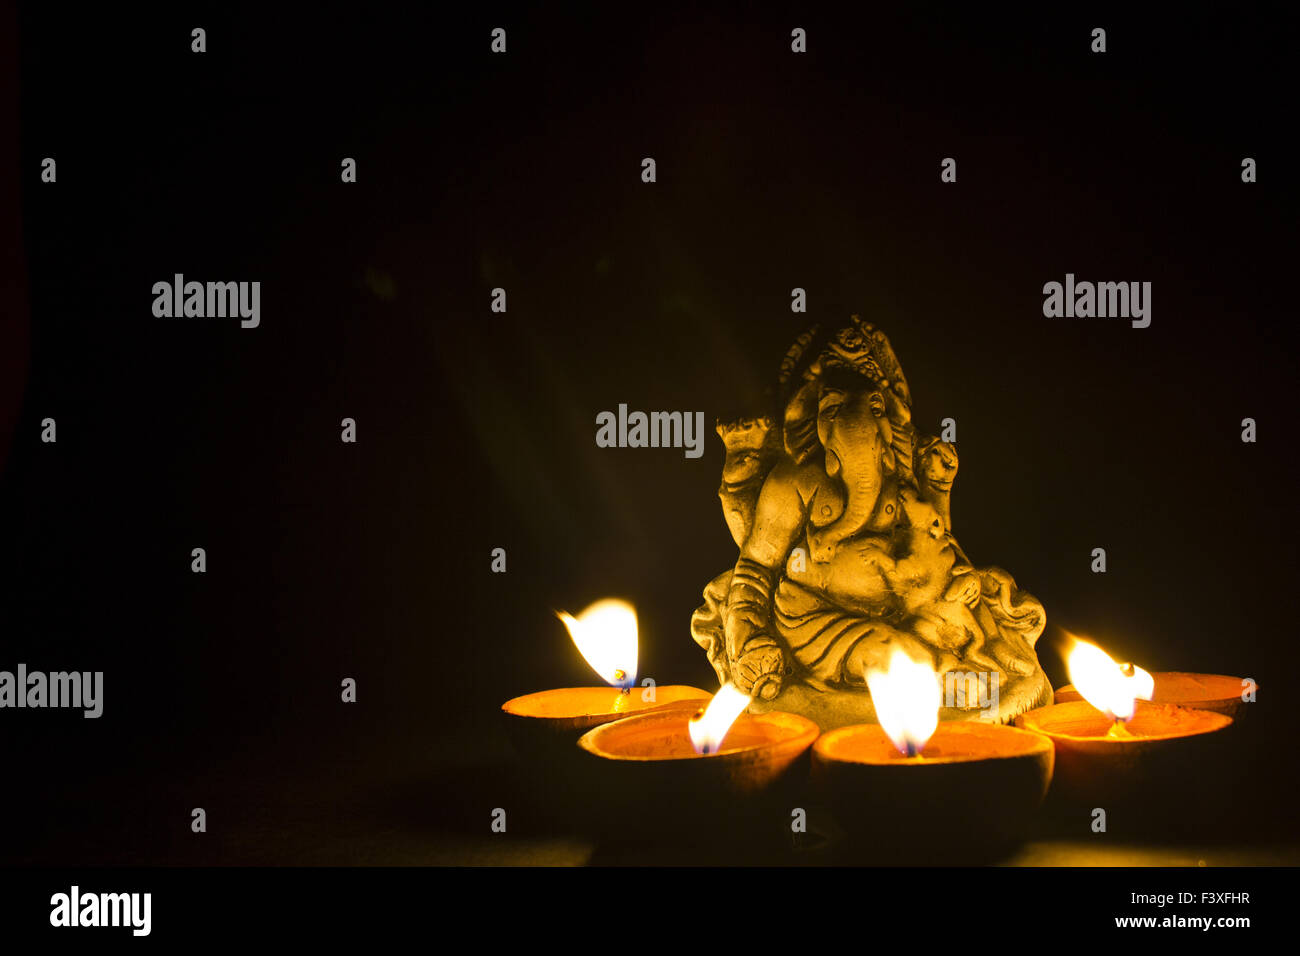 lord ganesh in lamp light Stock Photo